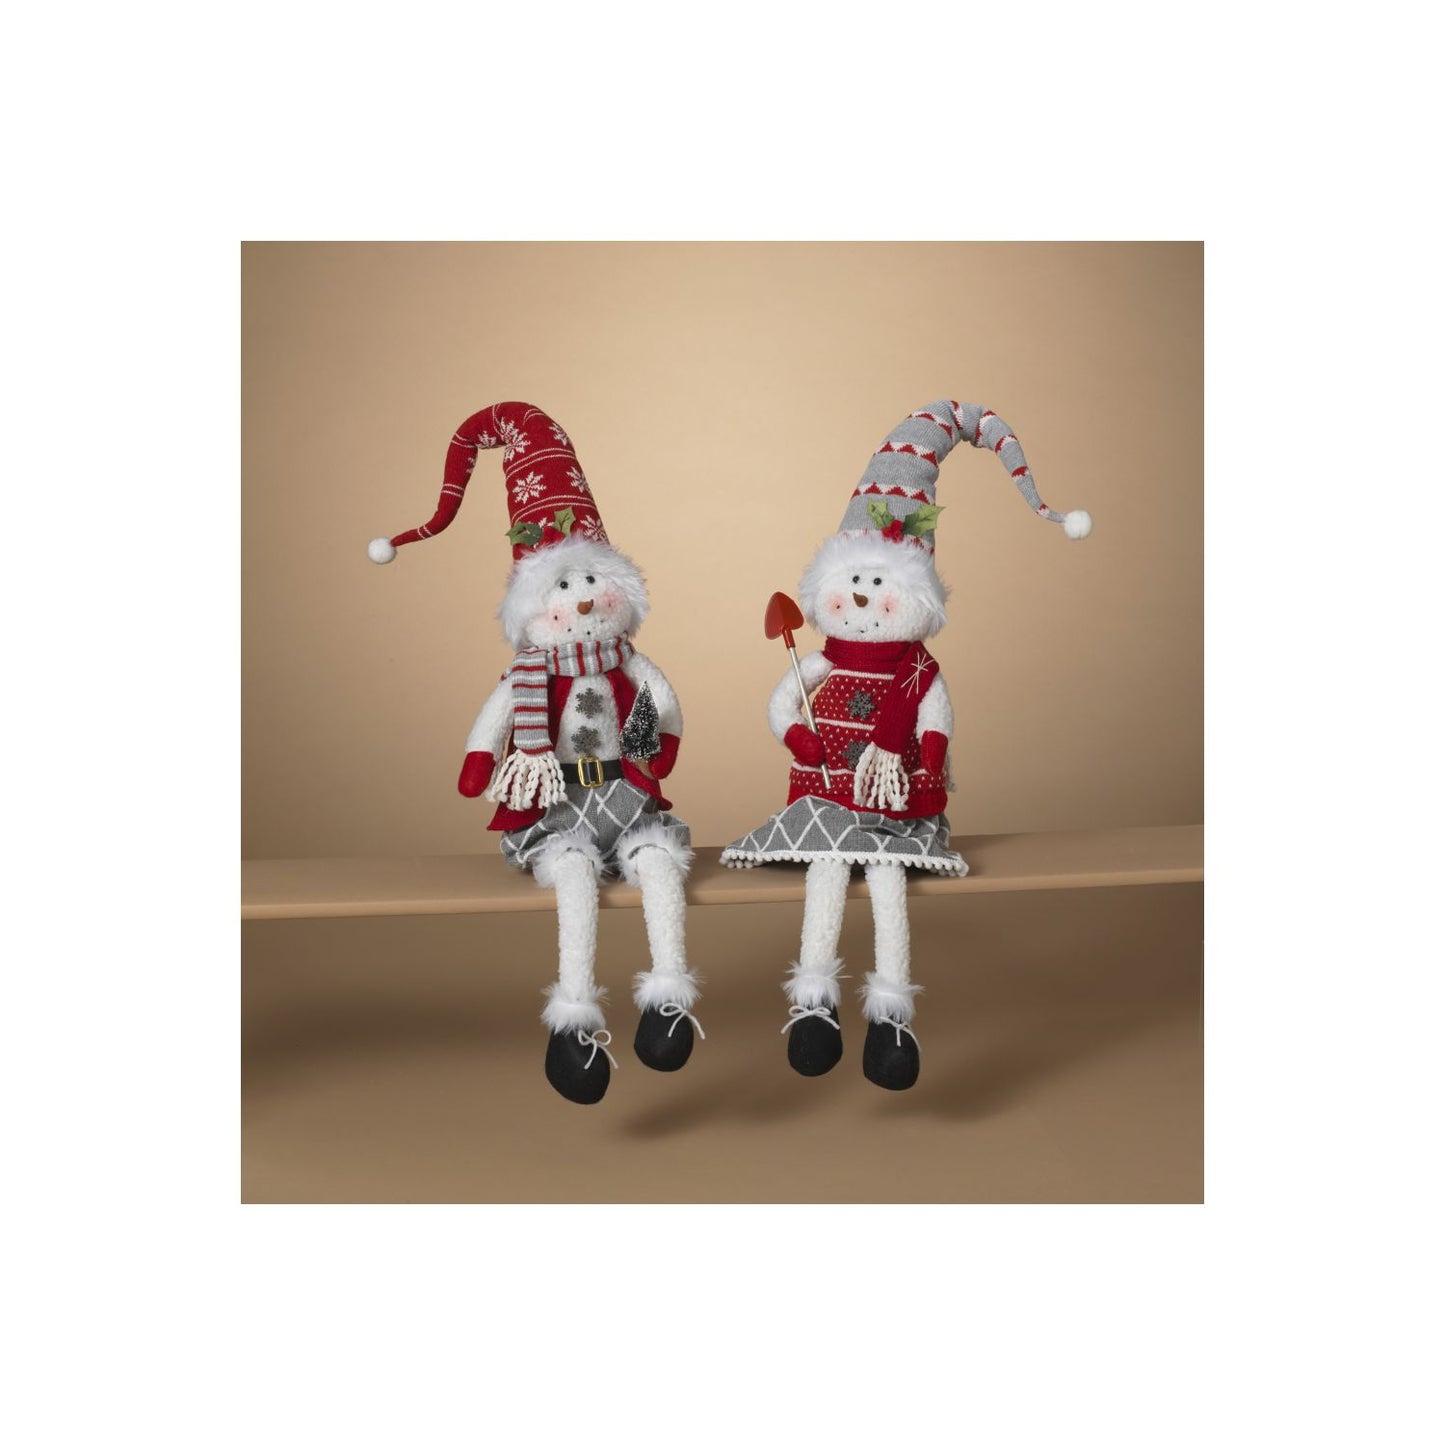 Gerson Company 22"H Plush Holiday Snowman Shelf Sitter, 2 Assorted